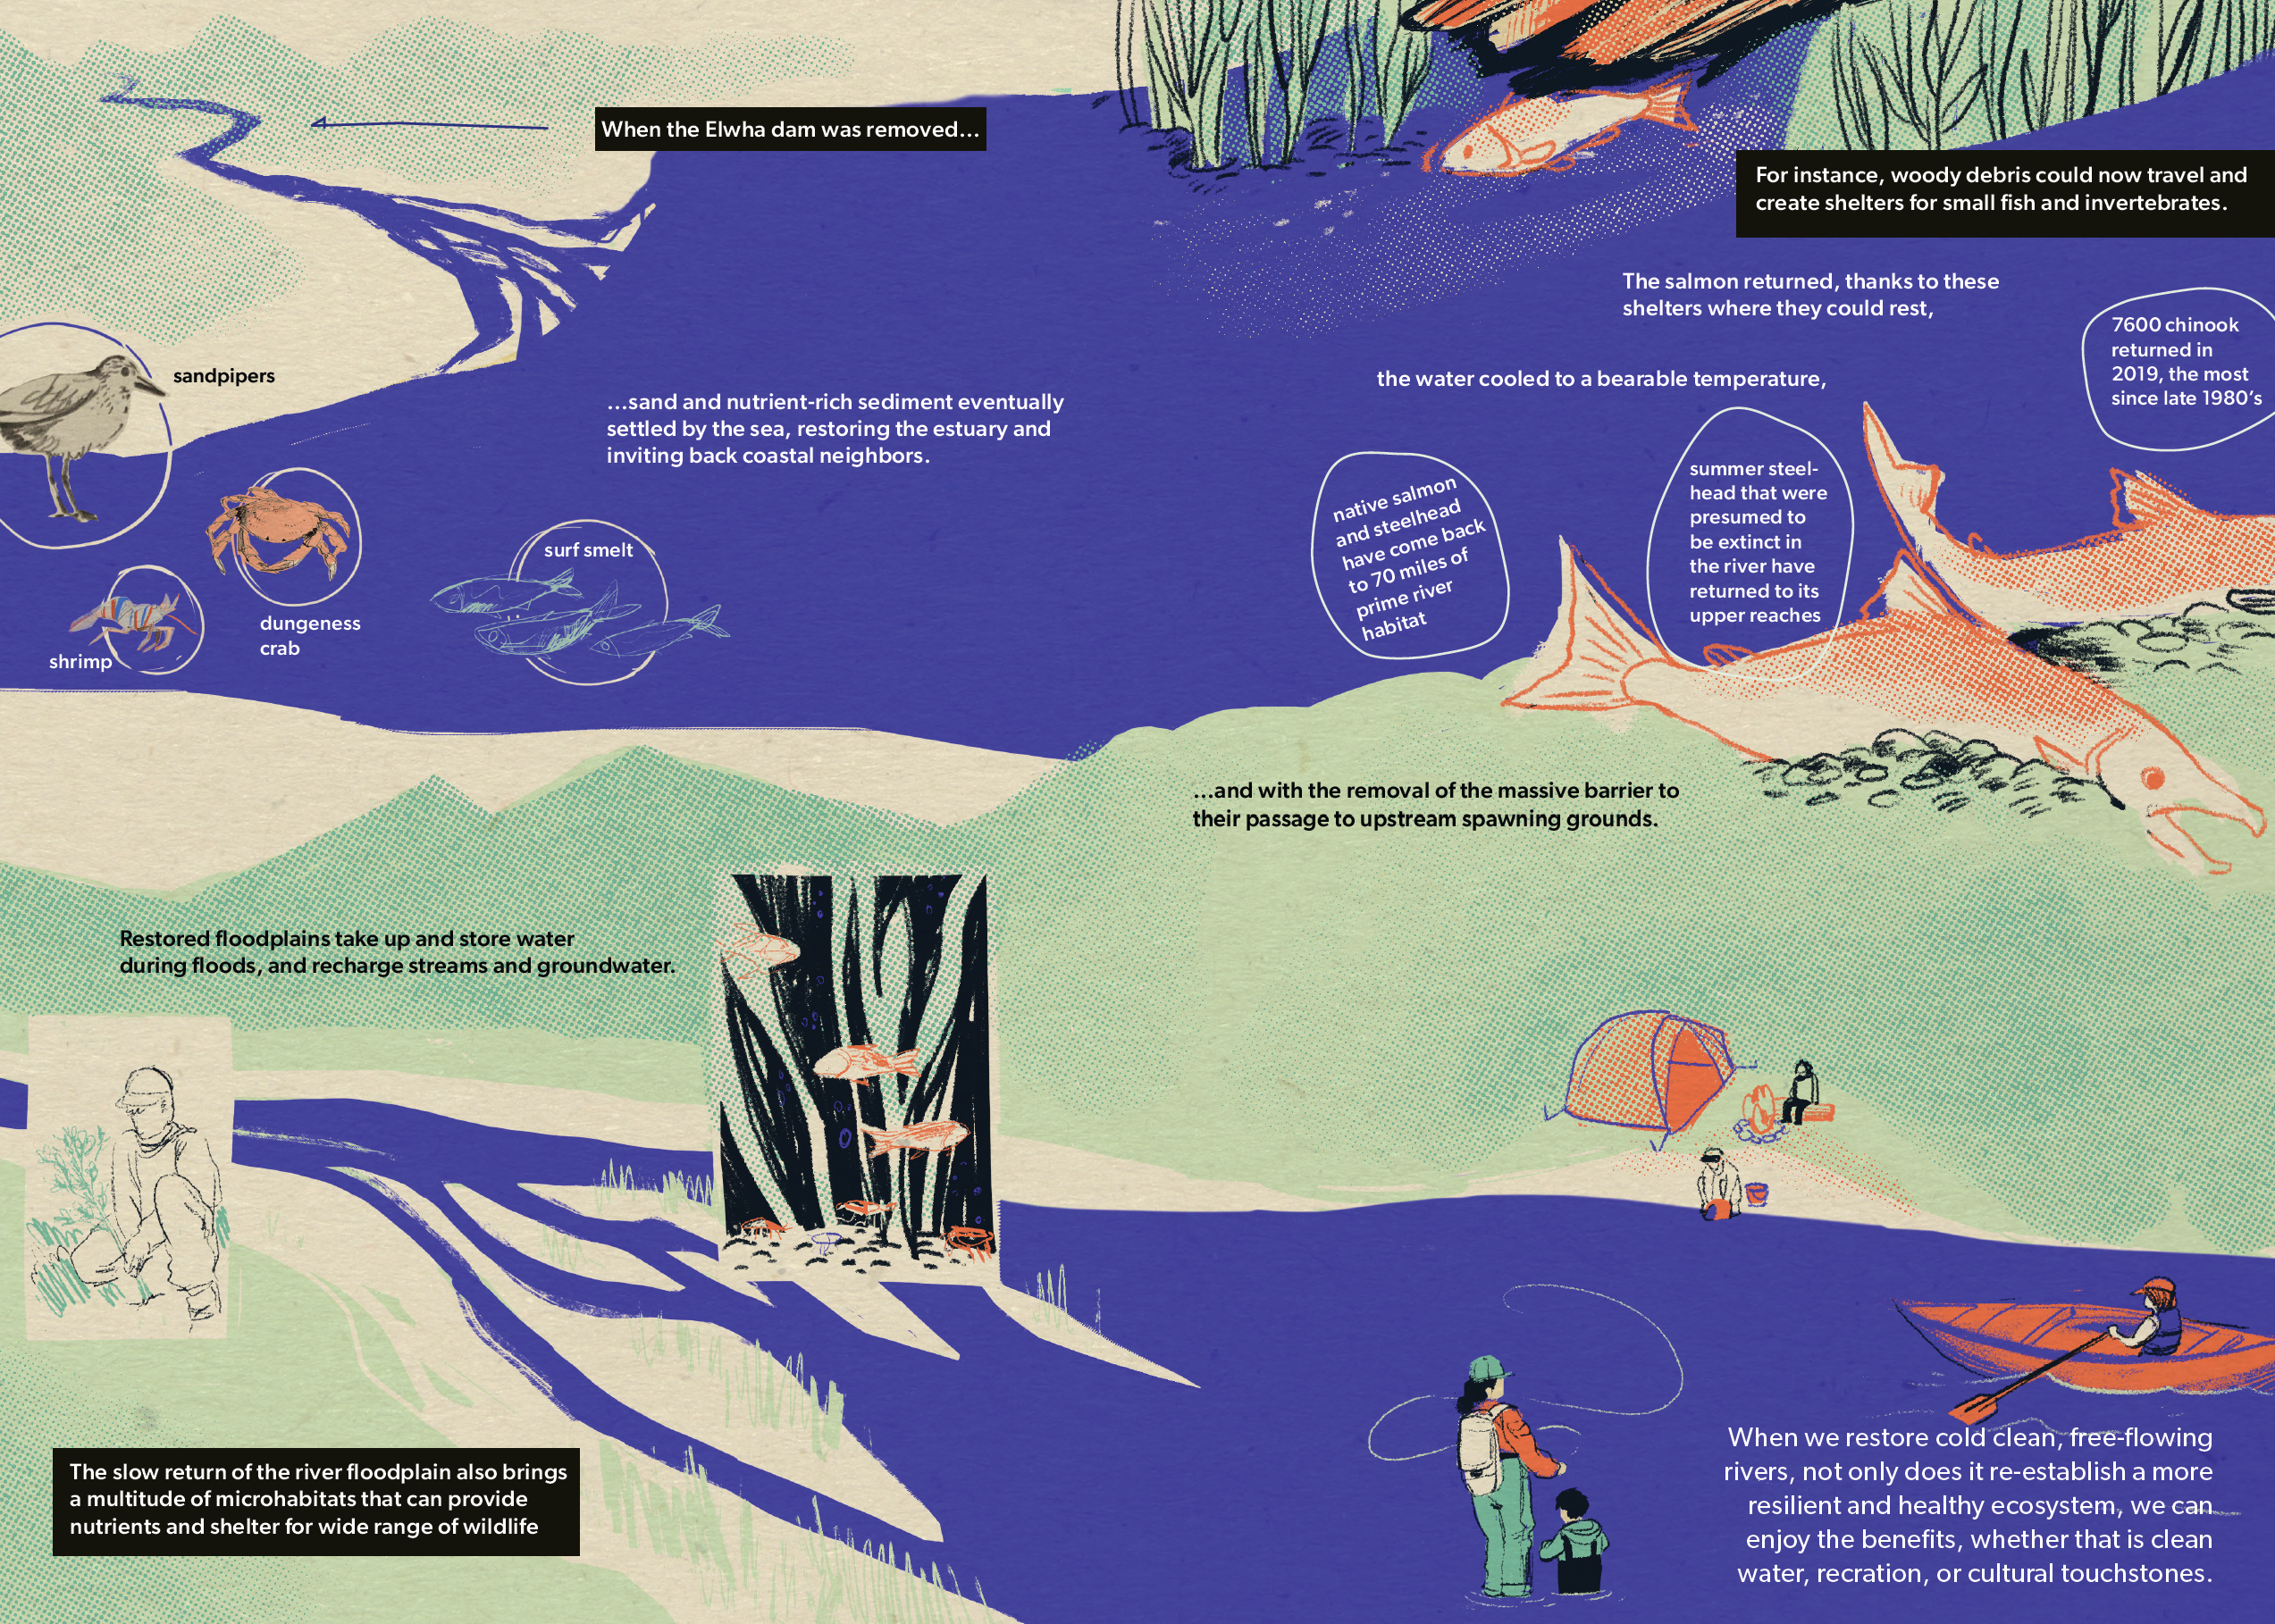 2 page comic spread with an illustration of the Elwha estuary and salmon, and depictions of restoration and recreation. The text reads: "When the Elwha dam was removed...sand and nutrient-rich sediment eventually settled by the sea, restoring the estuary and inviting back coastal neighbors." Small illustrations of sandpipers, shrimp, dungeness crab, and surf smelt float over the image of the estuary. "Restored floodplains take up and store water during floods, and recharge streams and groundwater. The slow return of the river floodplain also brings a multitude of microhabitats that can provide nutrients and shelter for a wide range of wildlife. For instance, woody debris could now travel and create shelters for small fish and invertebrates. The salmon returned, thanks to these shelters where they could rest, the water cooled to a bearable temperature, and with the removal of the massive barrier to their passage to upstream spawning grounds." Small facts float above the images of the spawning salmon: "Native salmon and steelhead have come back to 70 miles of prime river habitat." "Summer steelhead that were presumed to be extinct in the river have returned to its upper reaches." "7600 Chinook returned in 2019, the most since late 1980's." When we restore cold, clean, free-flowing rivers, not only does it re-establish a more resilient and healthy ecosystem, we can enjoy the benefits, whether that is clean water, recreation, or cultural touchstones.